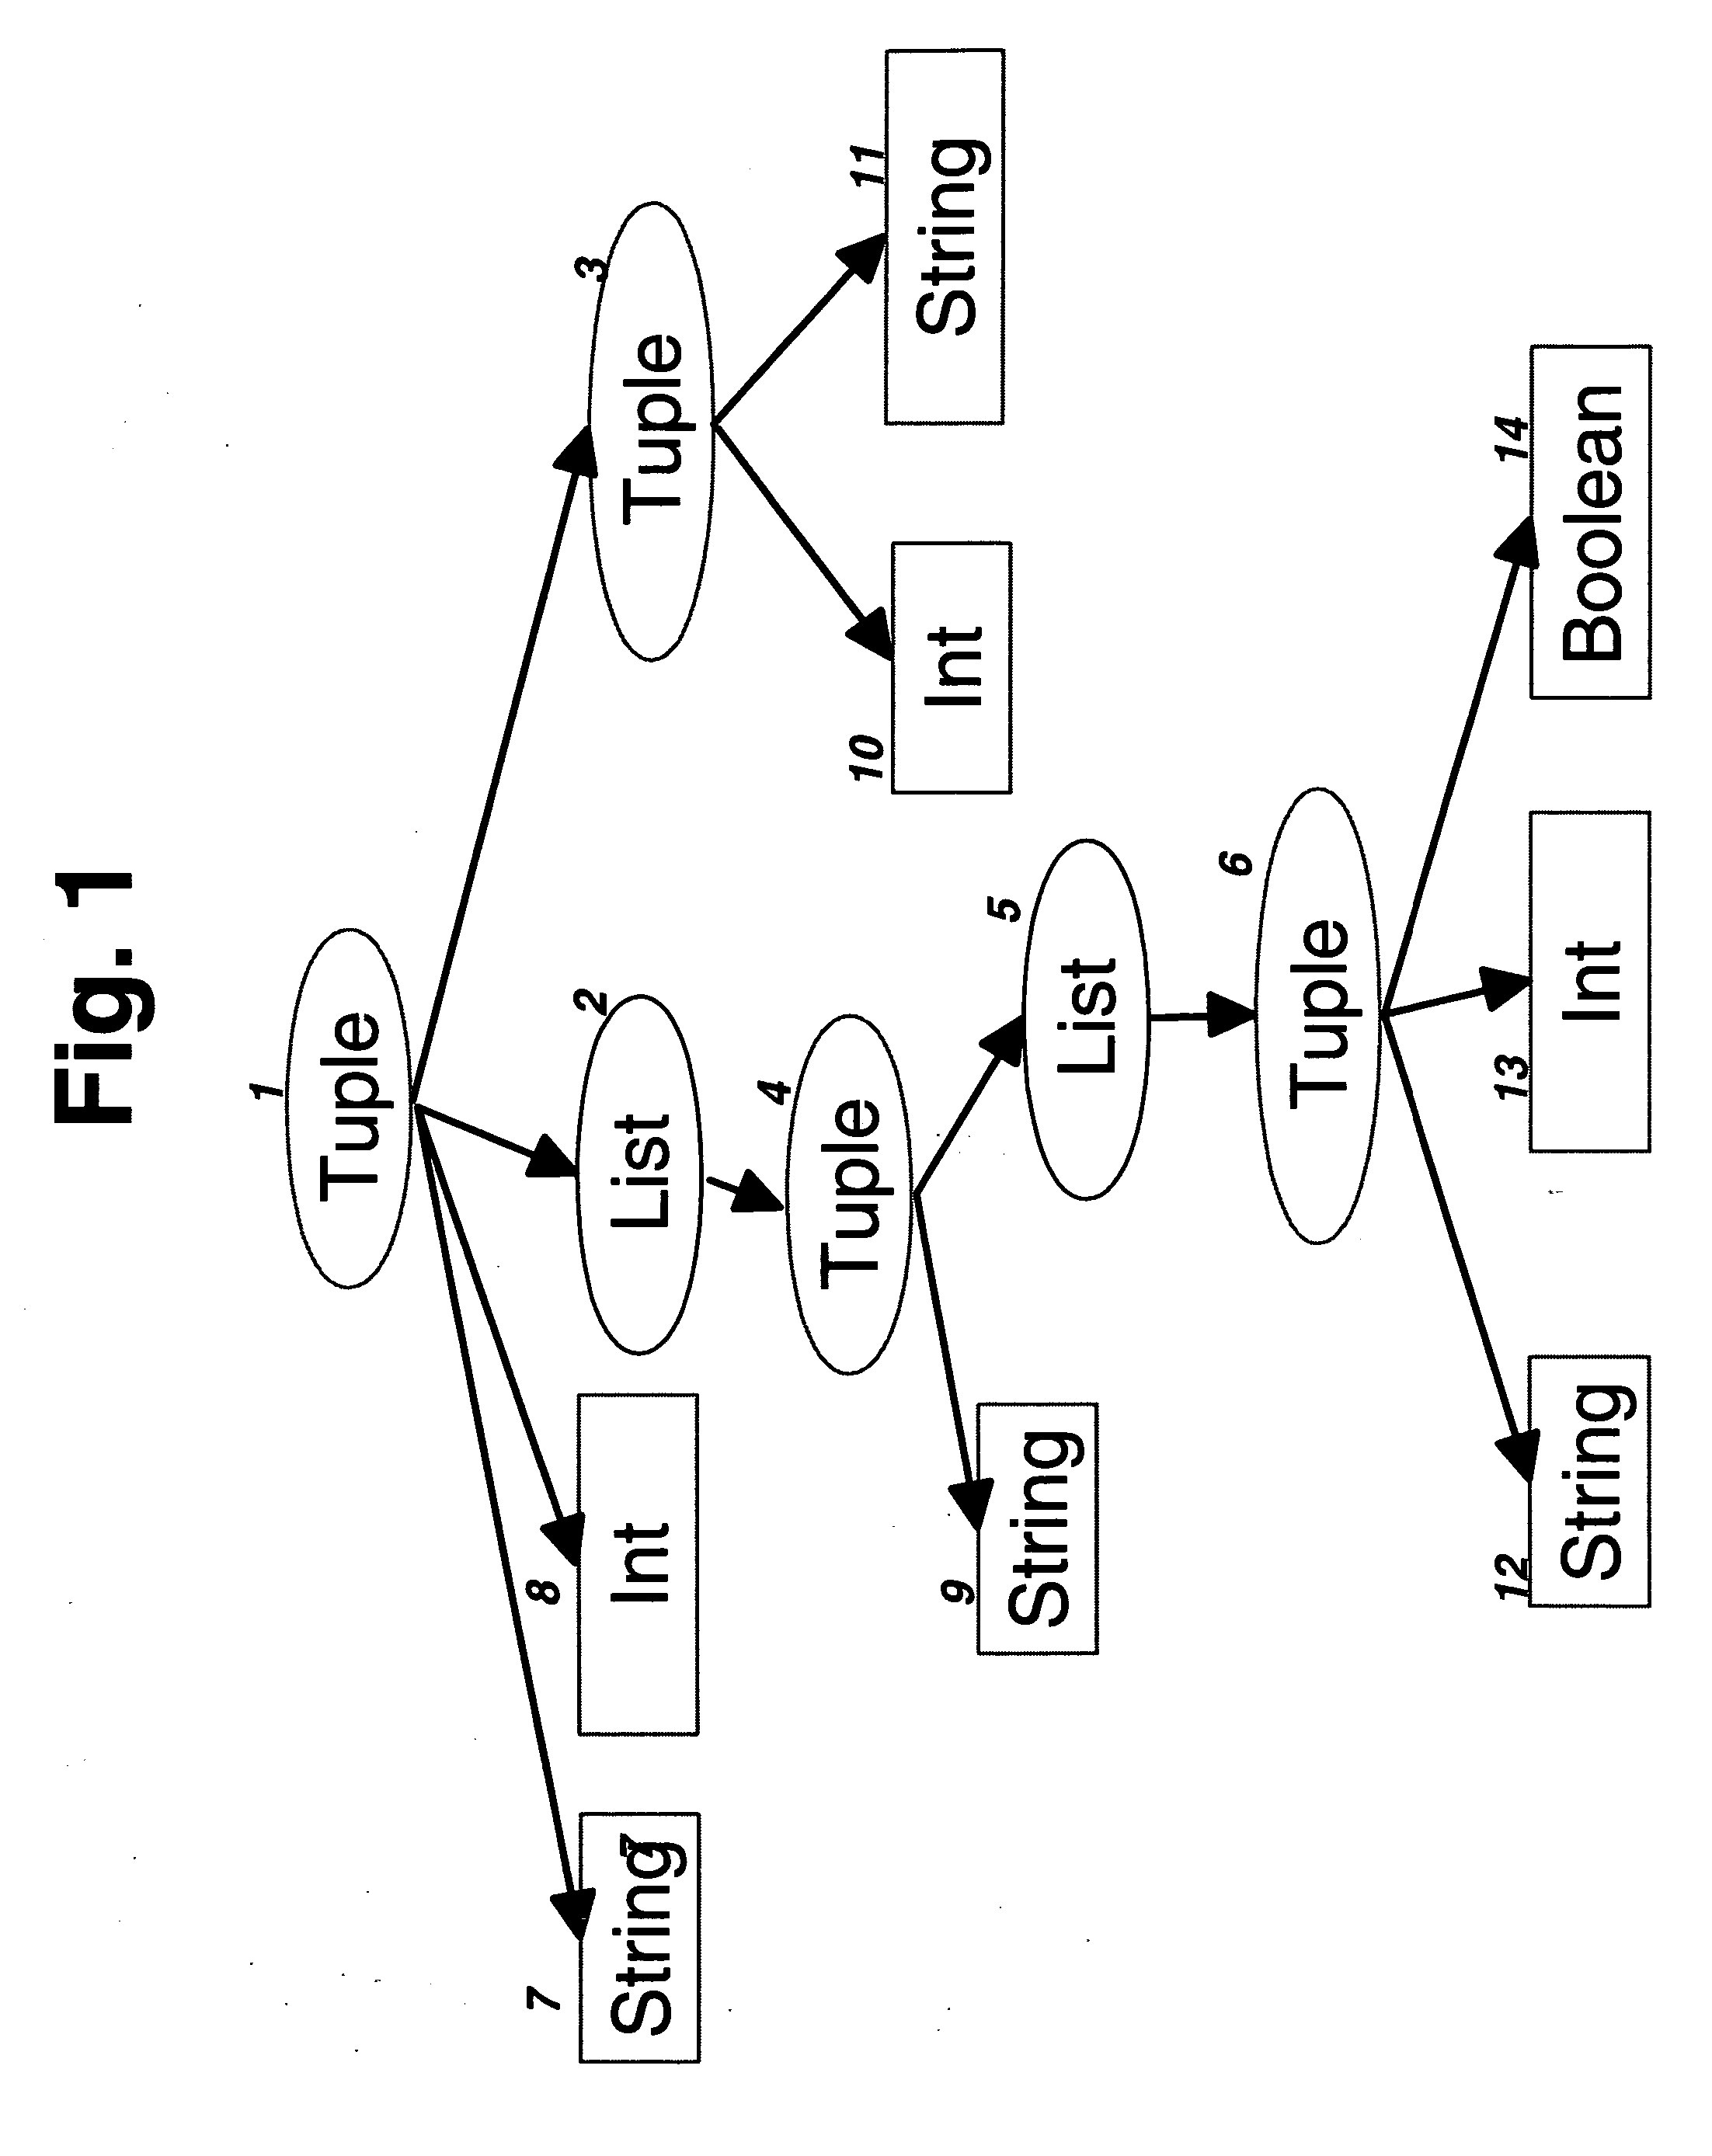 Byte stream organization with improved random and keyed access to information structures